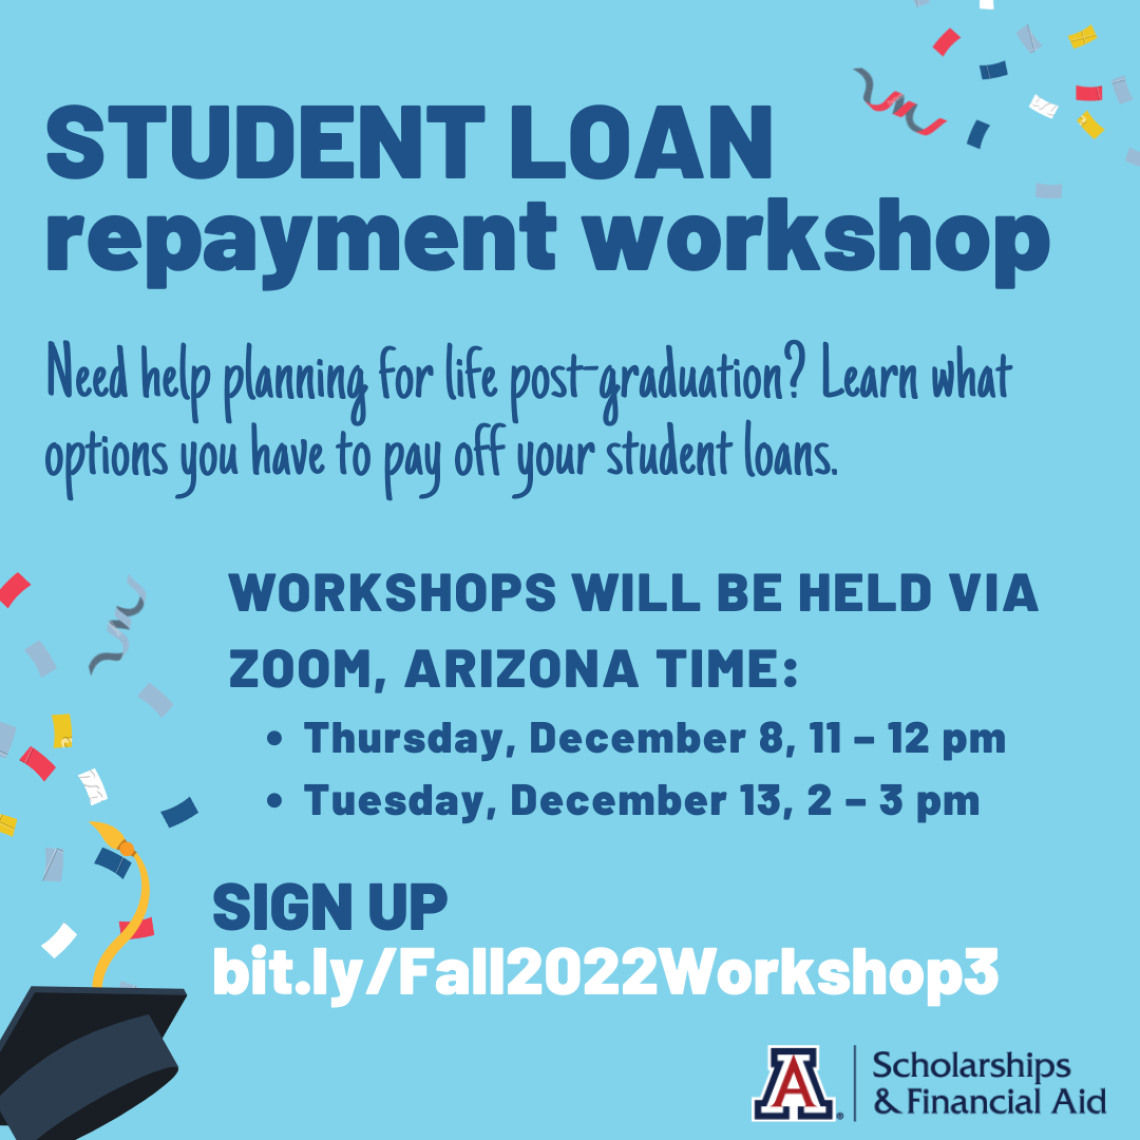 Student Loan Repayment Workshop flyer with dates/time and RSVP link